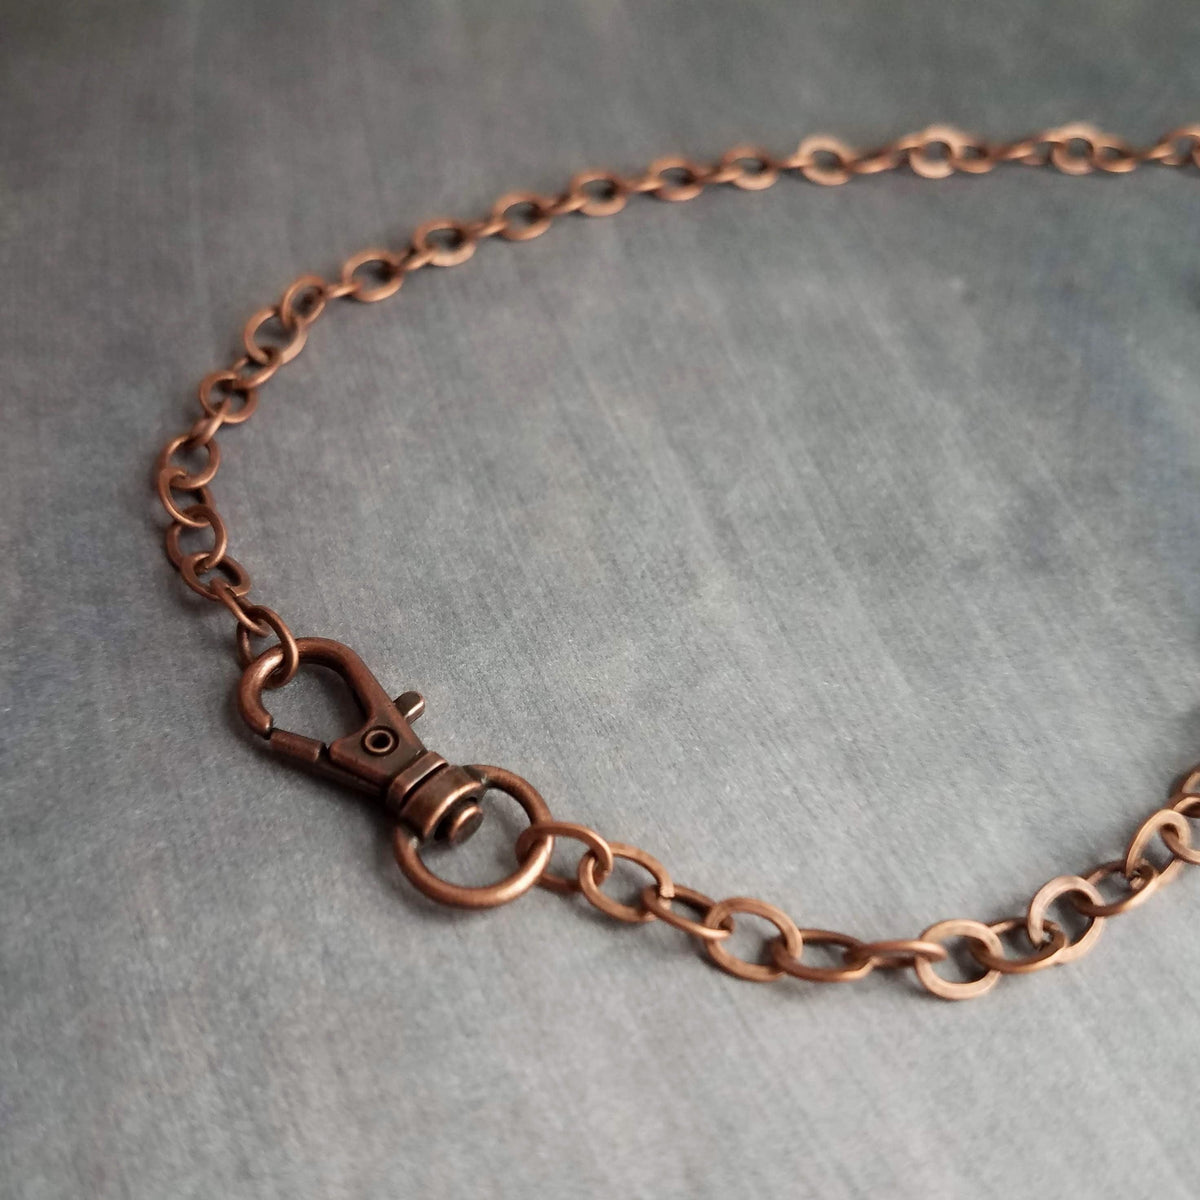 Large Copper Chain Necklace, big clasp necklace, front clasp chain